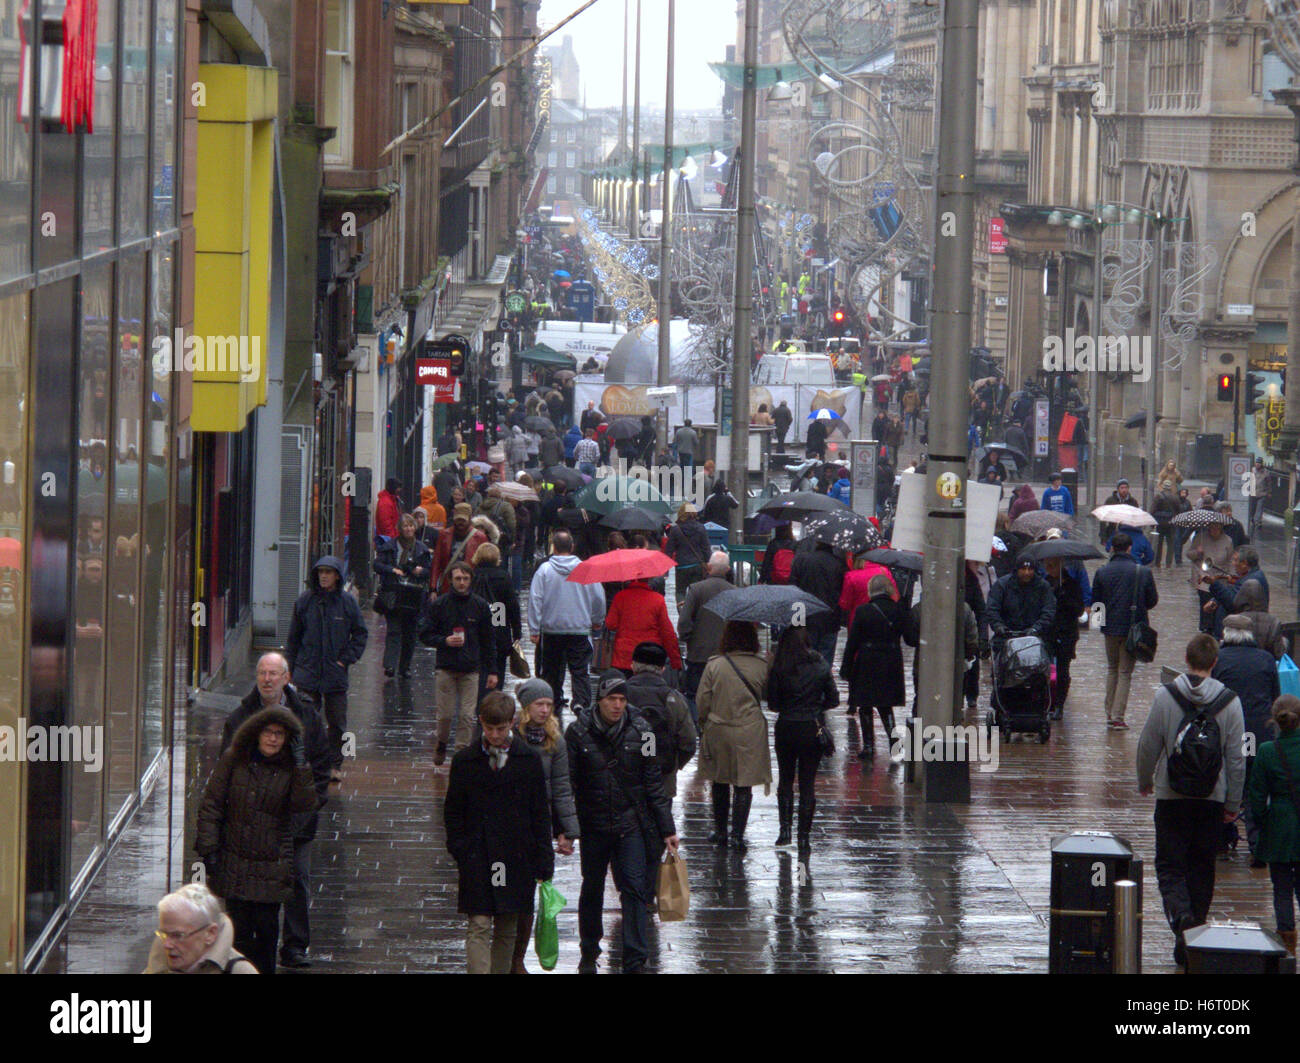 Glasgow in the rain wet streets and  red umbrella umbrellas shopping bags Stock Photo